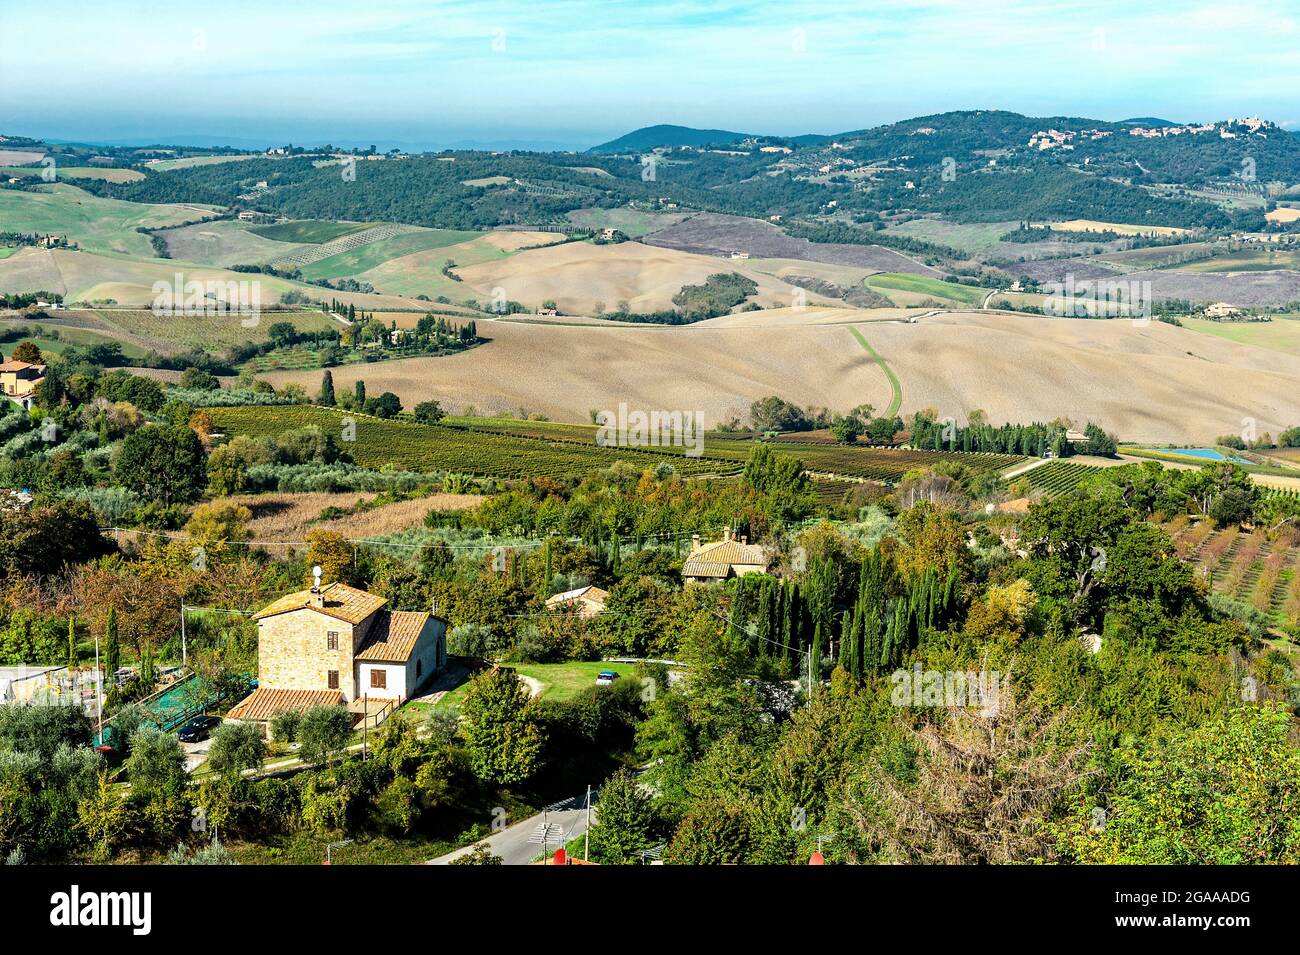 Aerial view of Tuscan countryside. Stock Photo